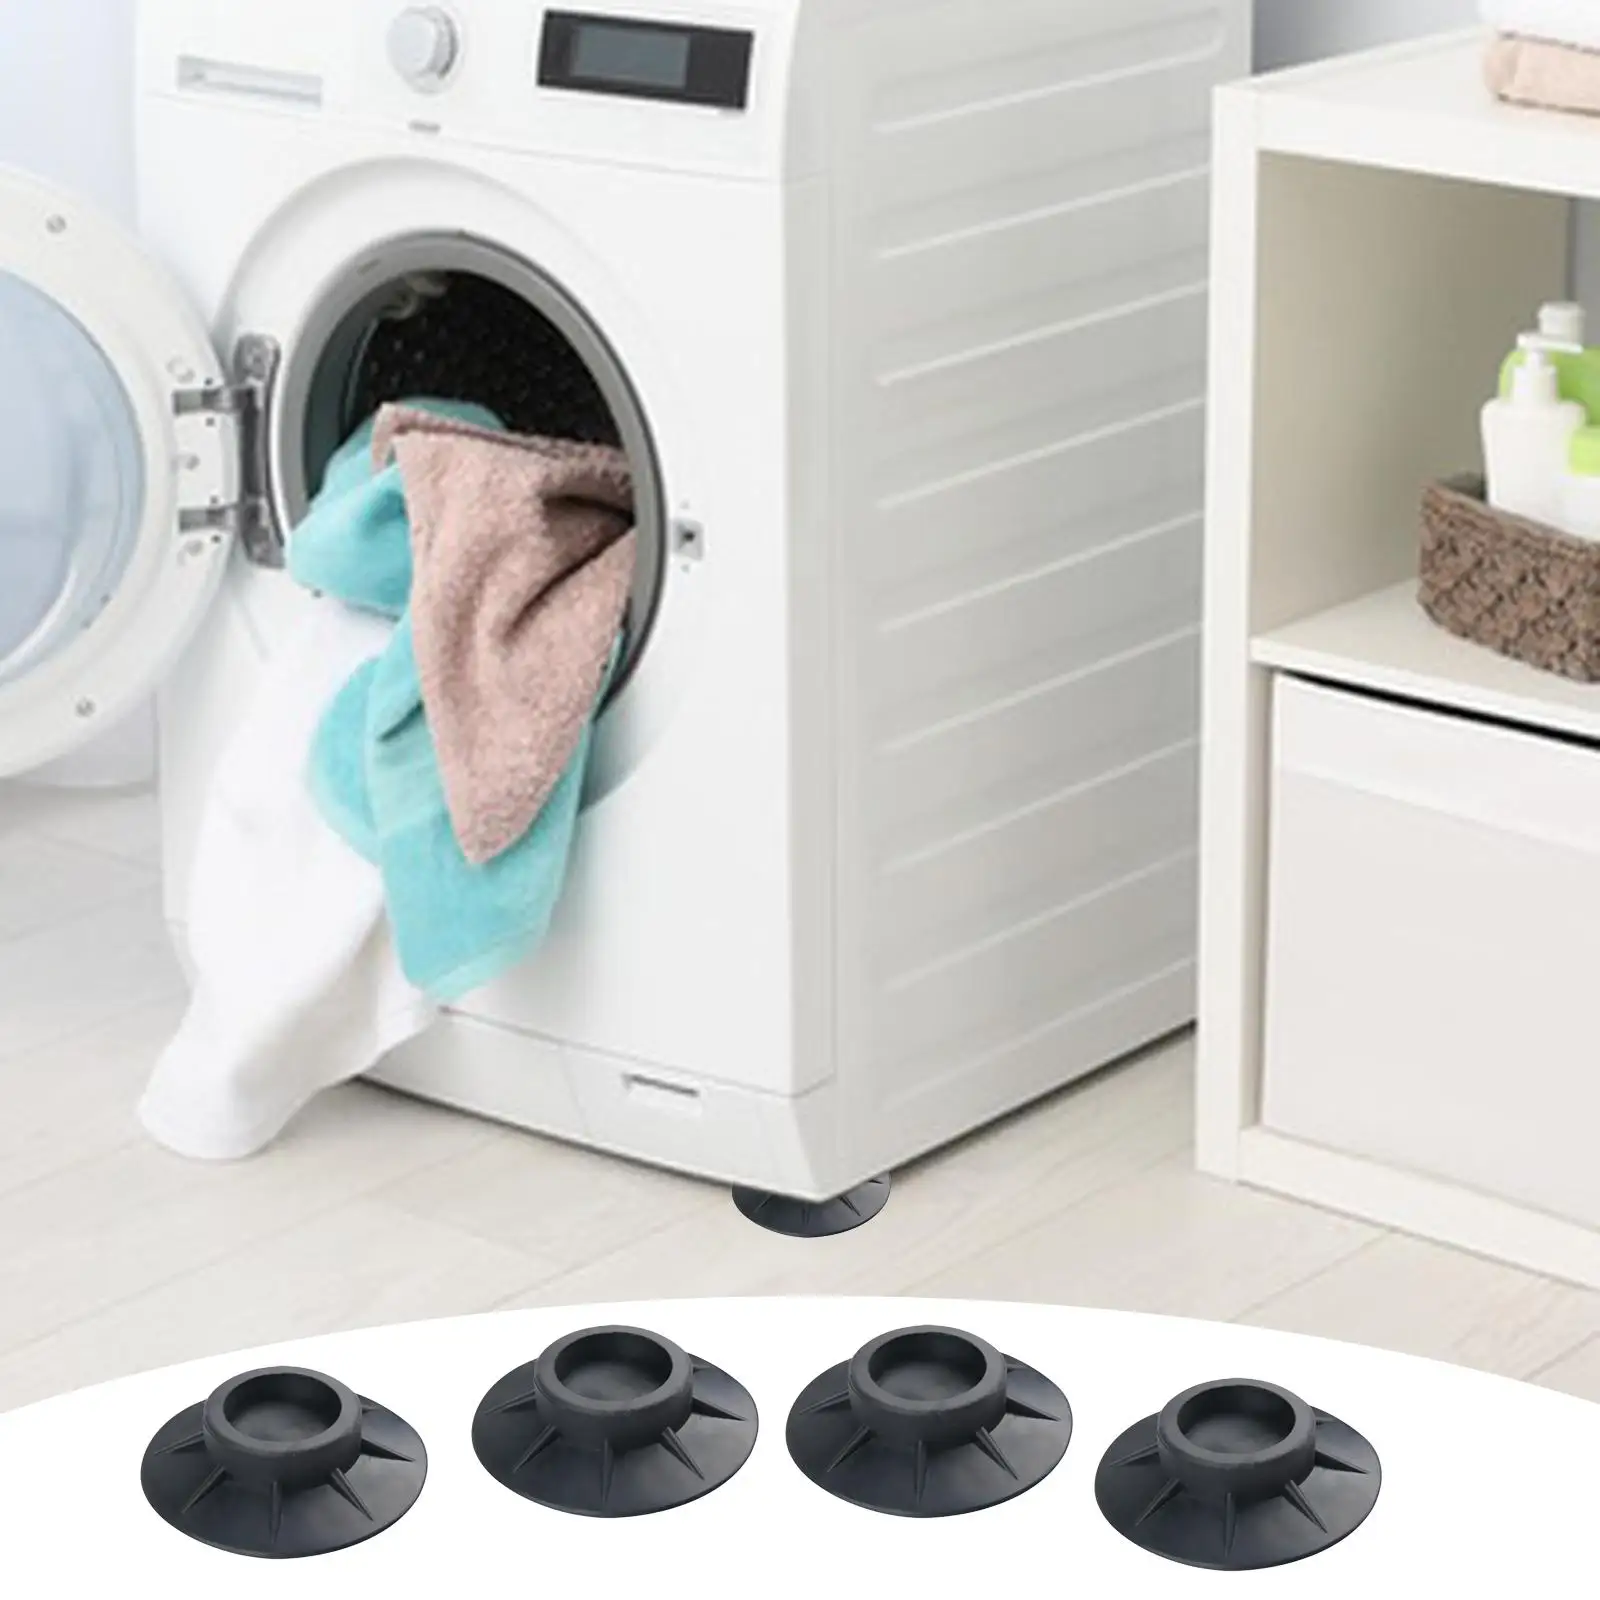 4Pcs Washing Machine Feet Protects Laundry Room Floor Covers Moisture Mats Slip Anitivibration Pad for Furniture Refrigerator